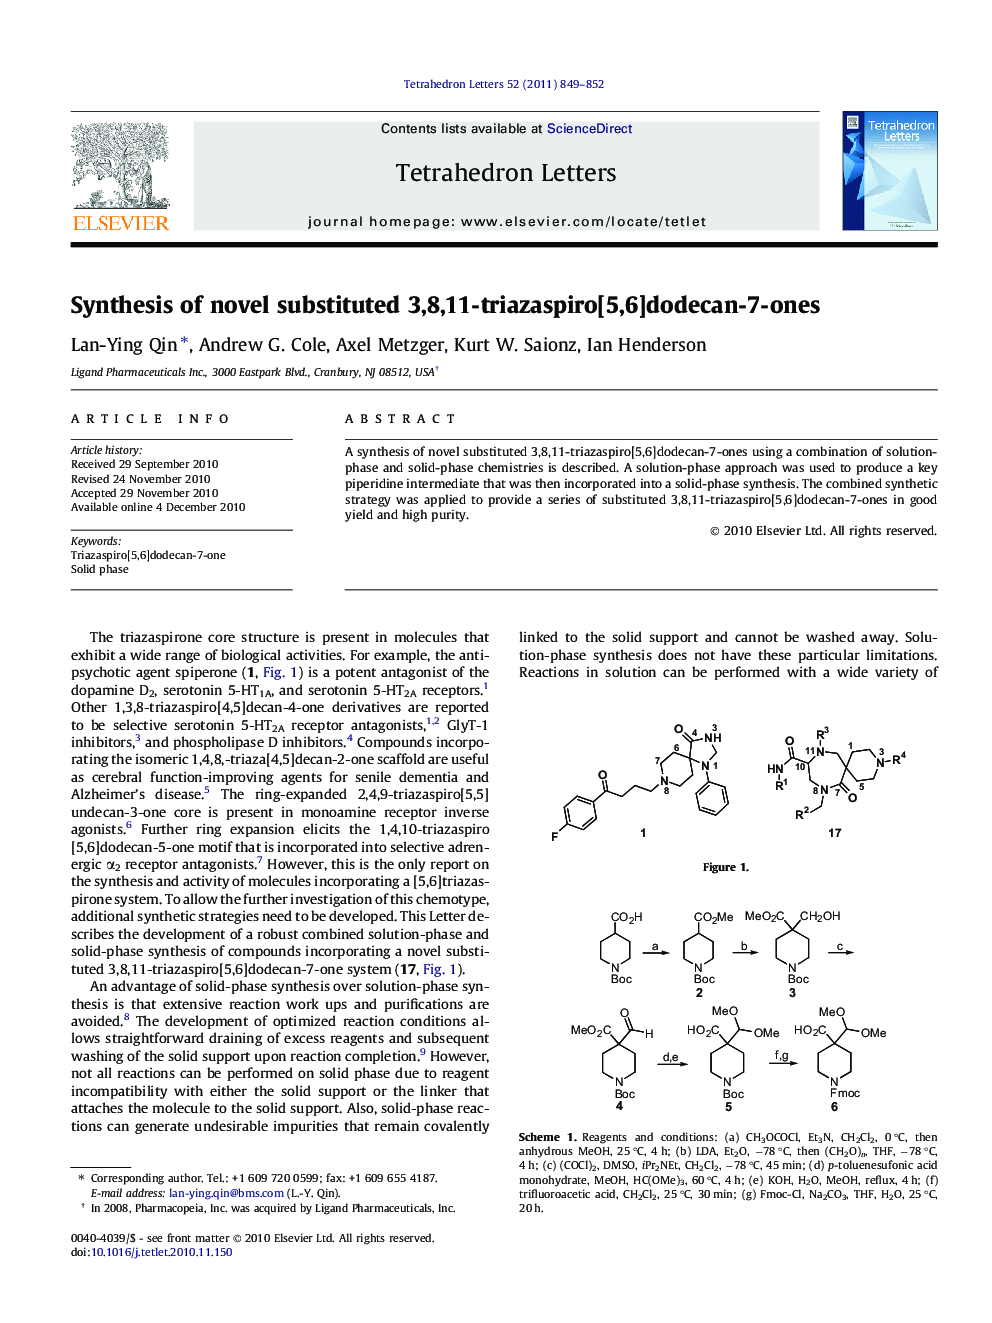 Synthesis of novel substituted 3,8,11-triazaspiro[5,6]dodecan-7-ones